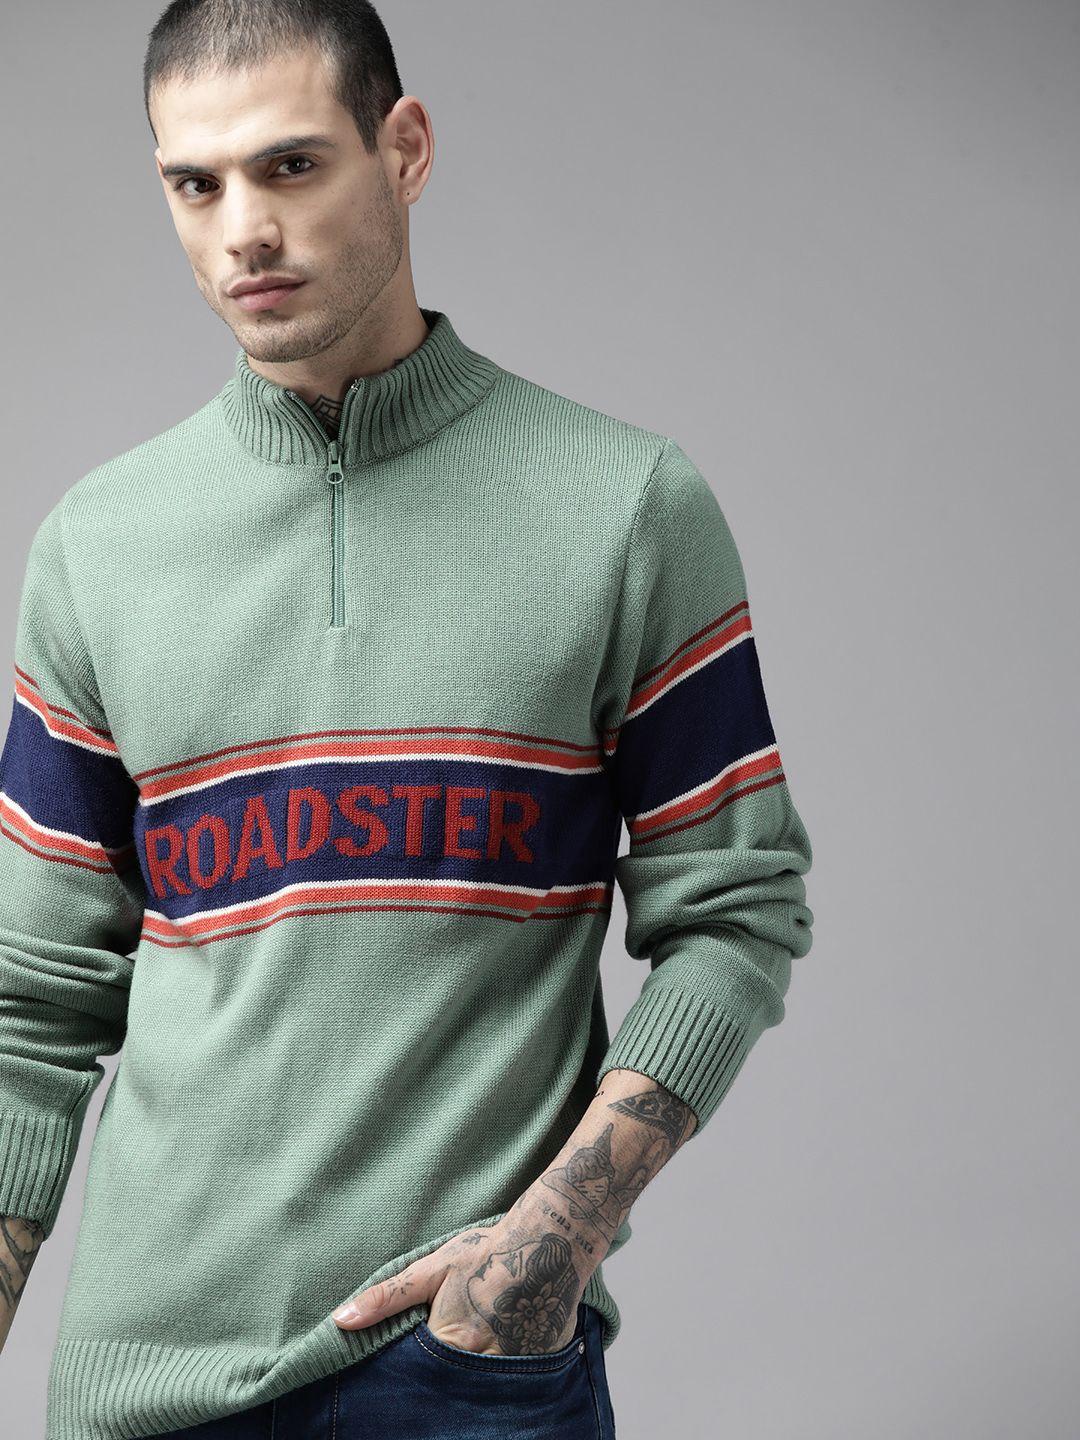 the-roadster-lifestyle-co.-men-green-&-maroon-printed-pullover